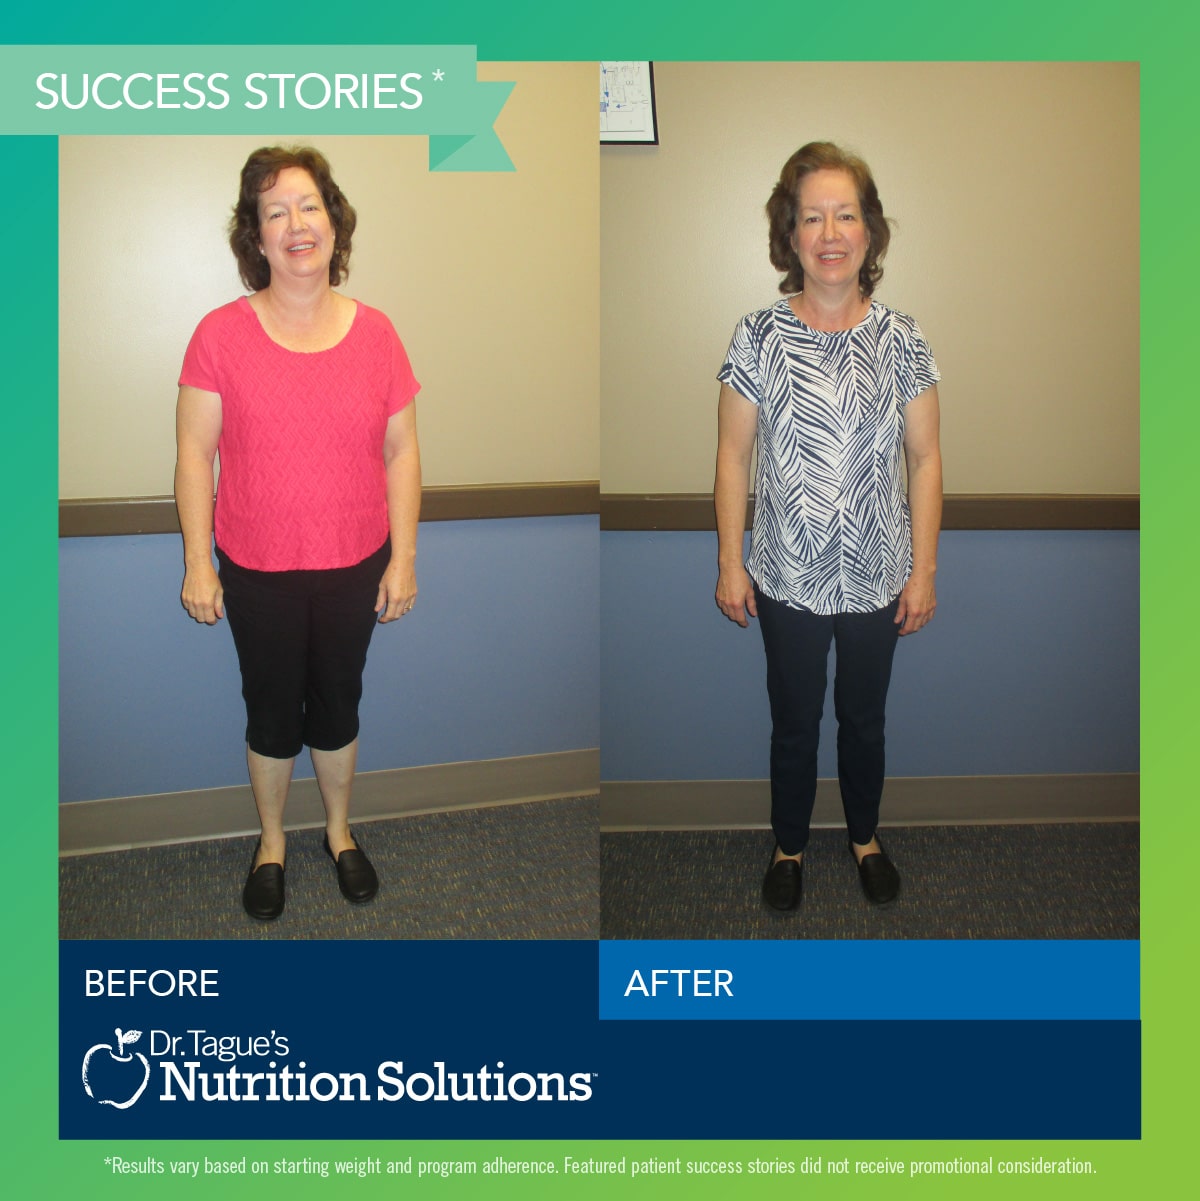 Dr. Tague's Center for Nutrition Success Stories - Esther lost 25 lbs in 11 weeks